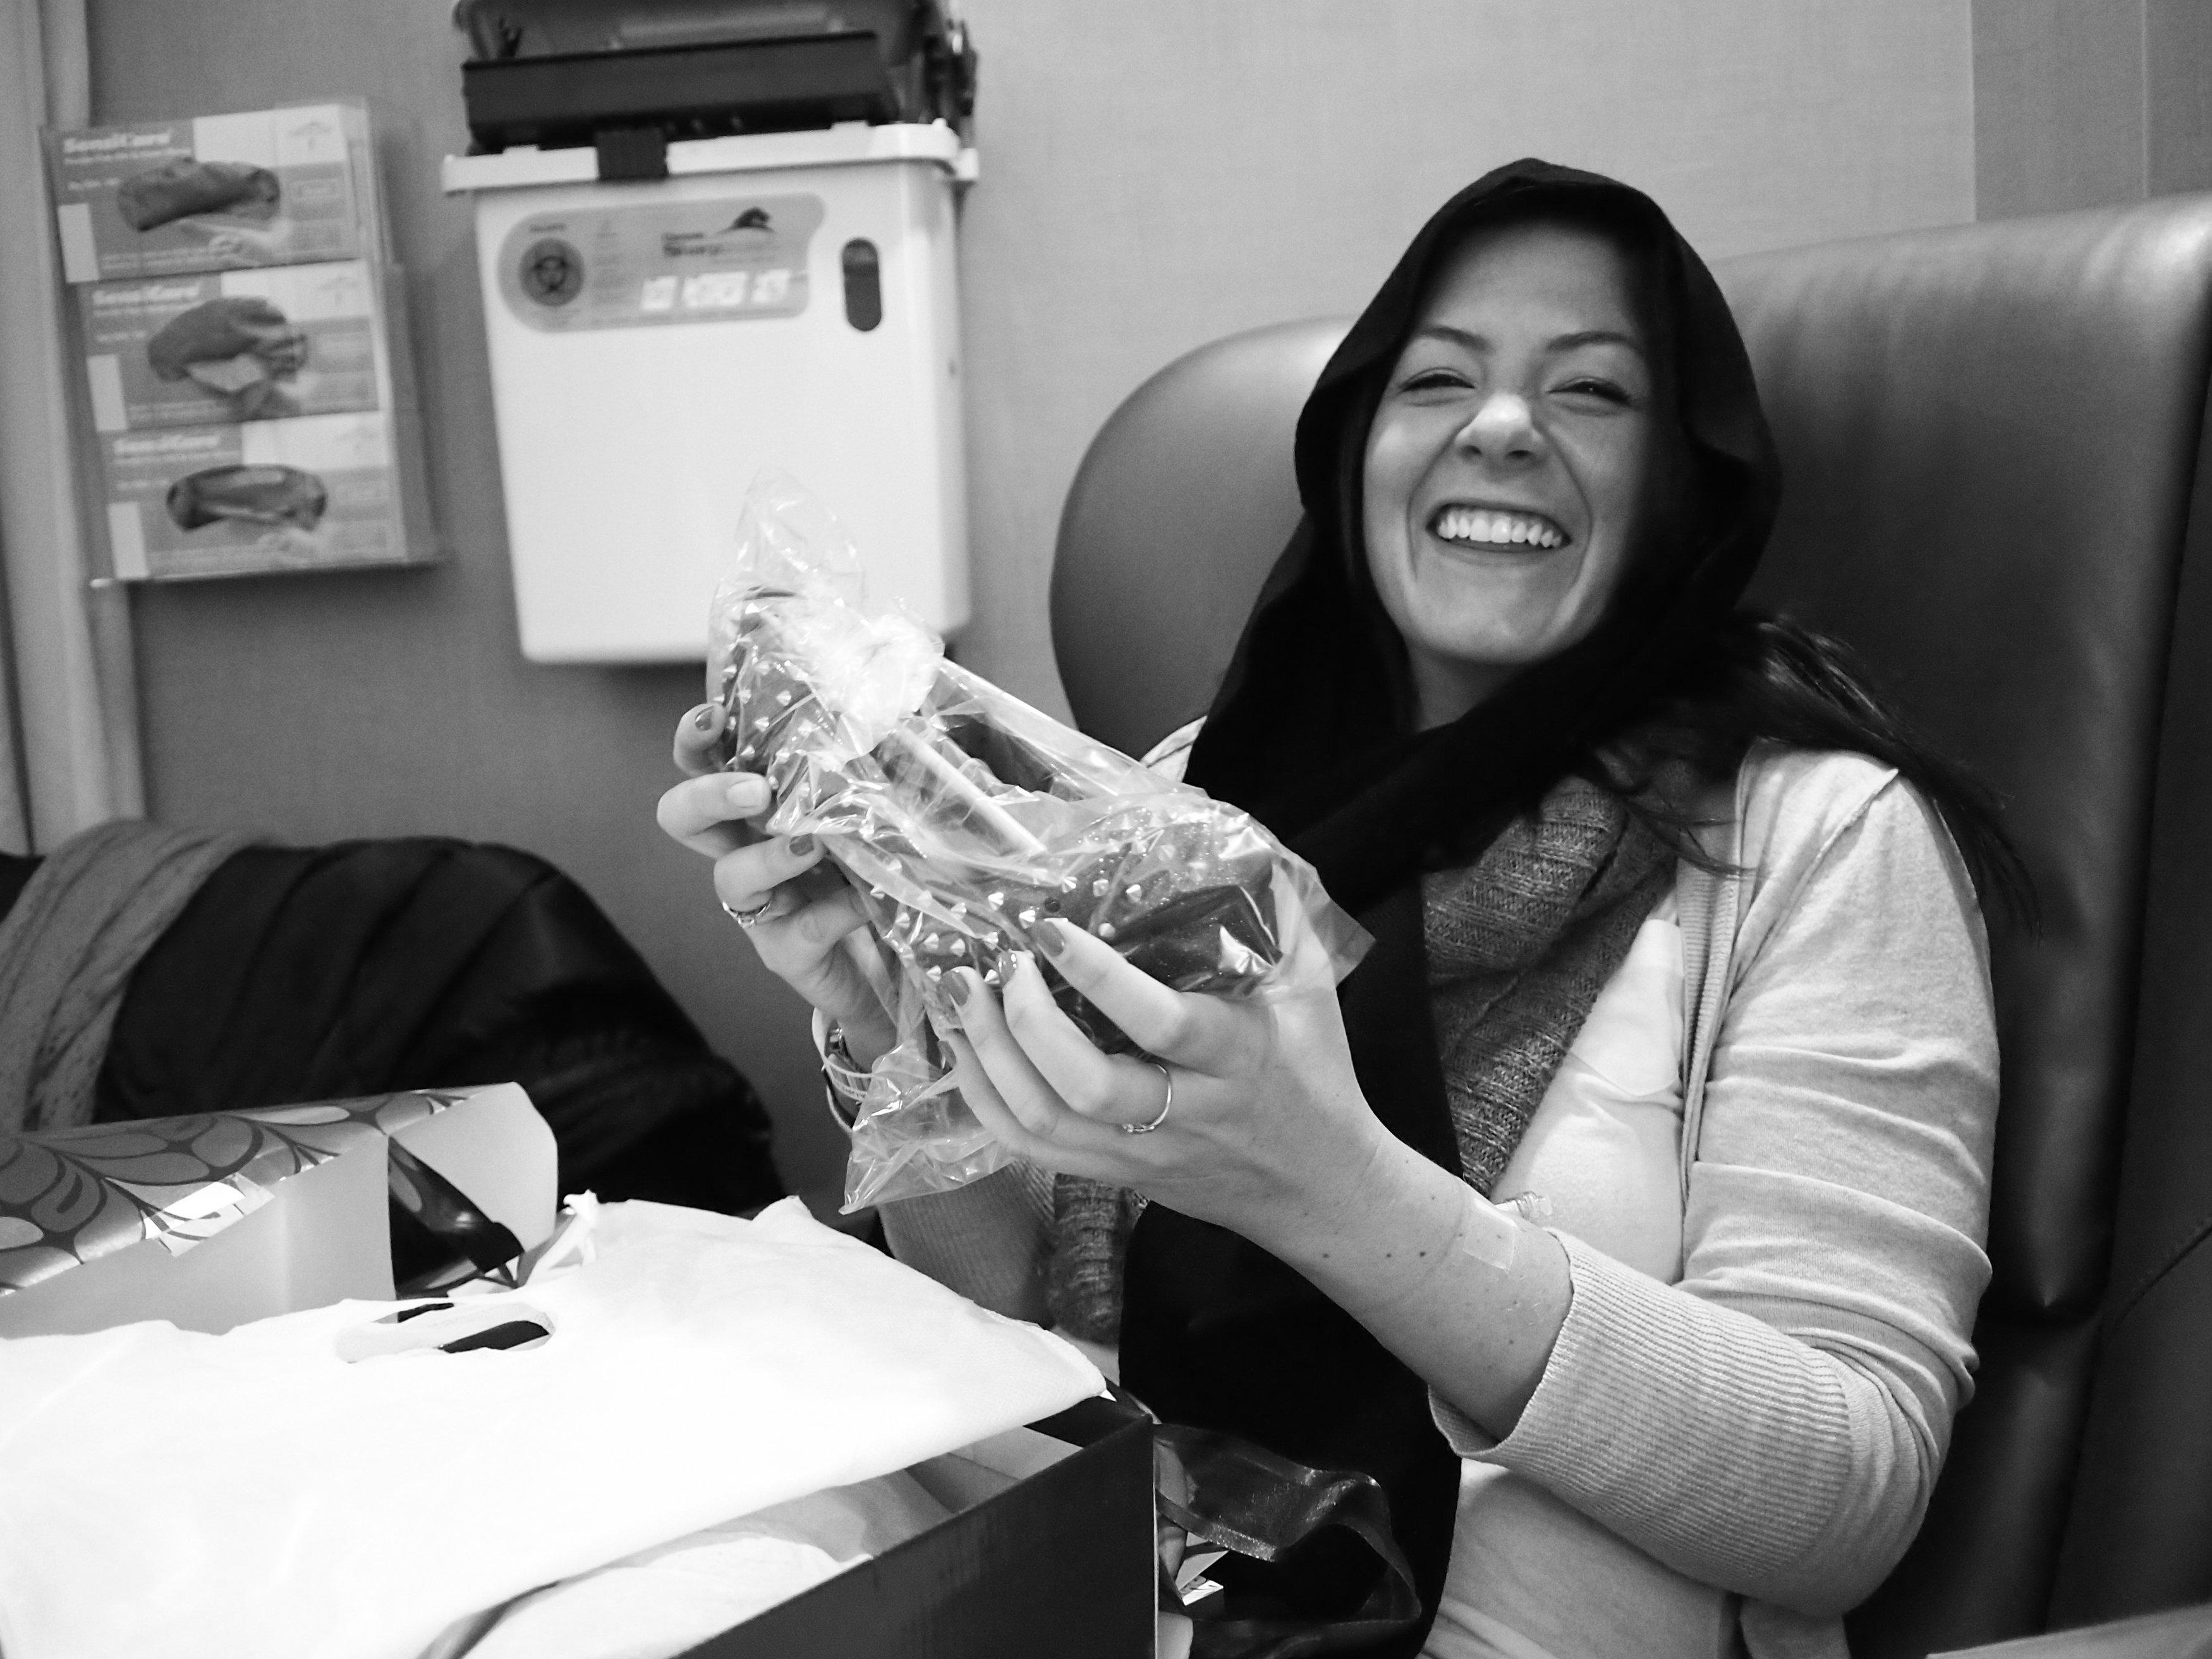 Lauren Truelock receives her “chemo shoes” on her first day of chemotherapy from Sidne Hirsch. (Sidne Hirsch Photography)